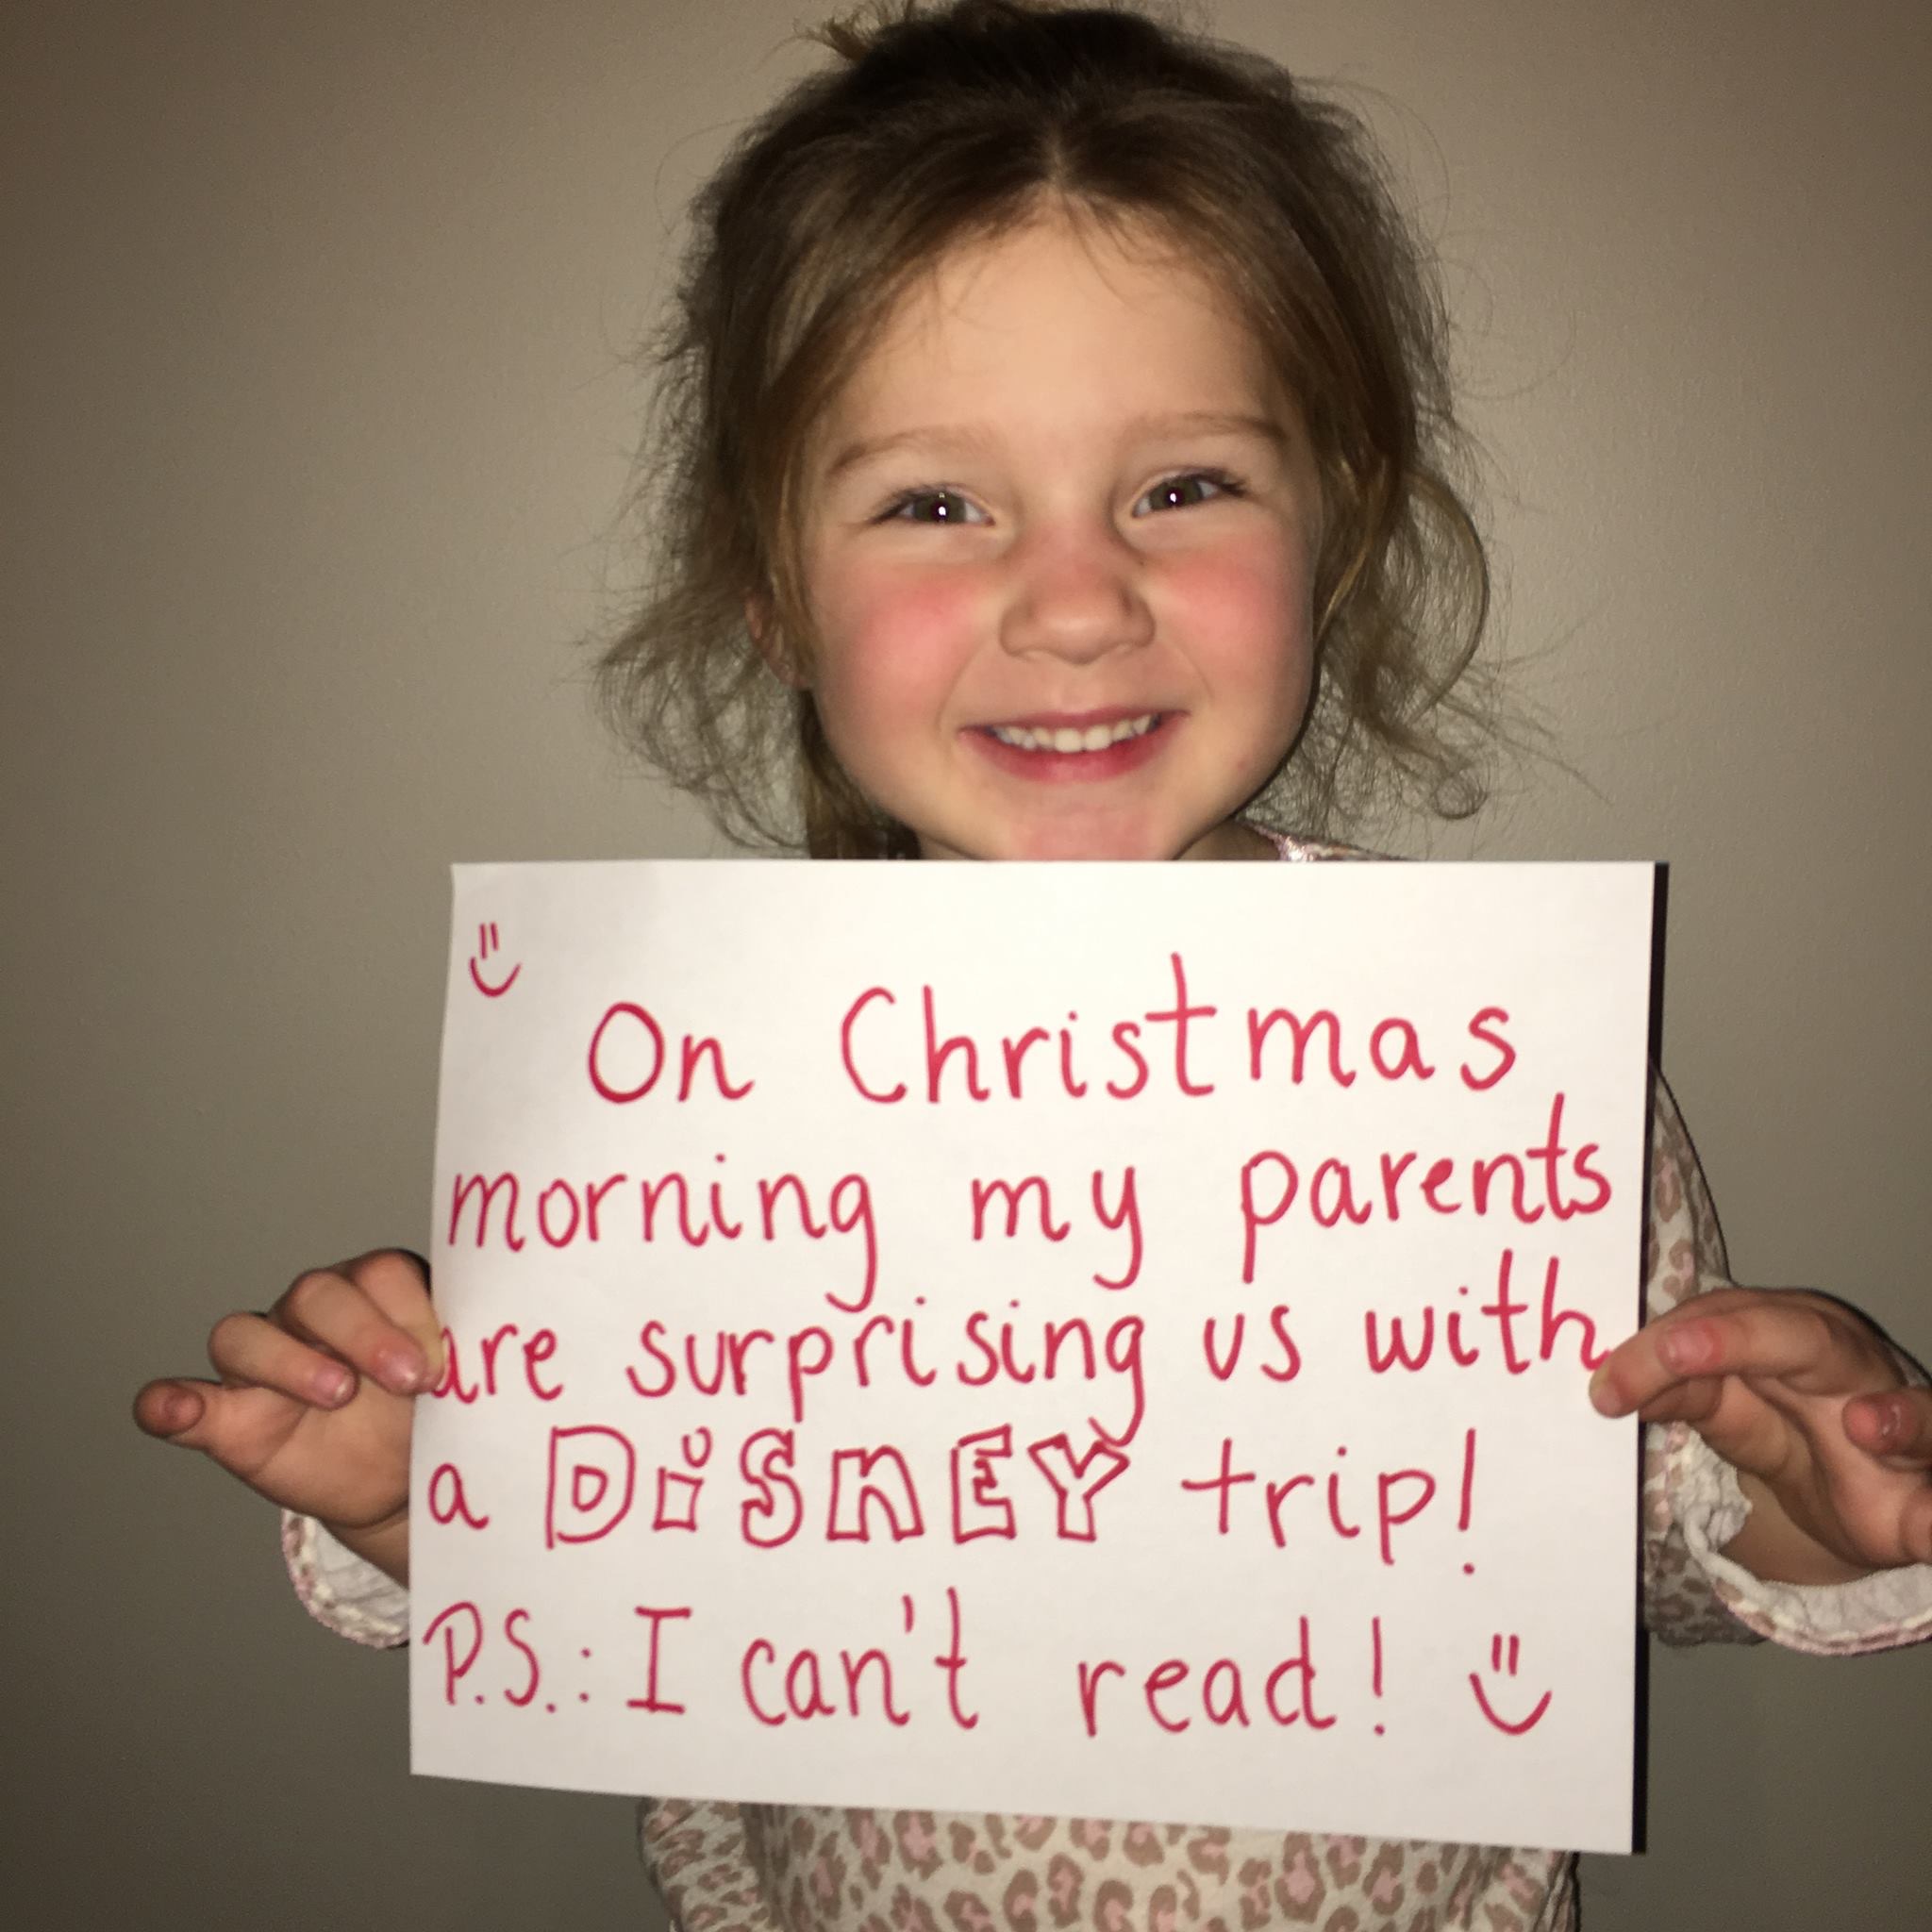 smile - On Christmas, morning my parents Care surprising us with a Disney trip! P.S. I can't read!